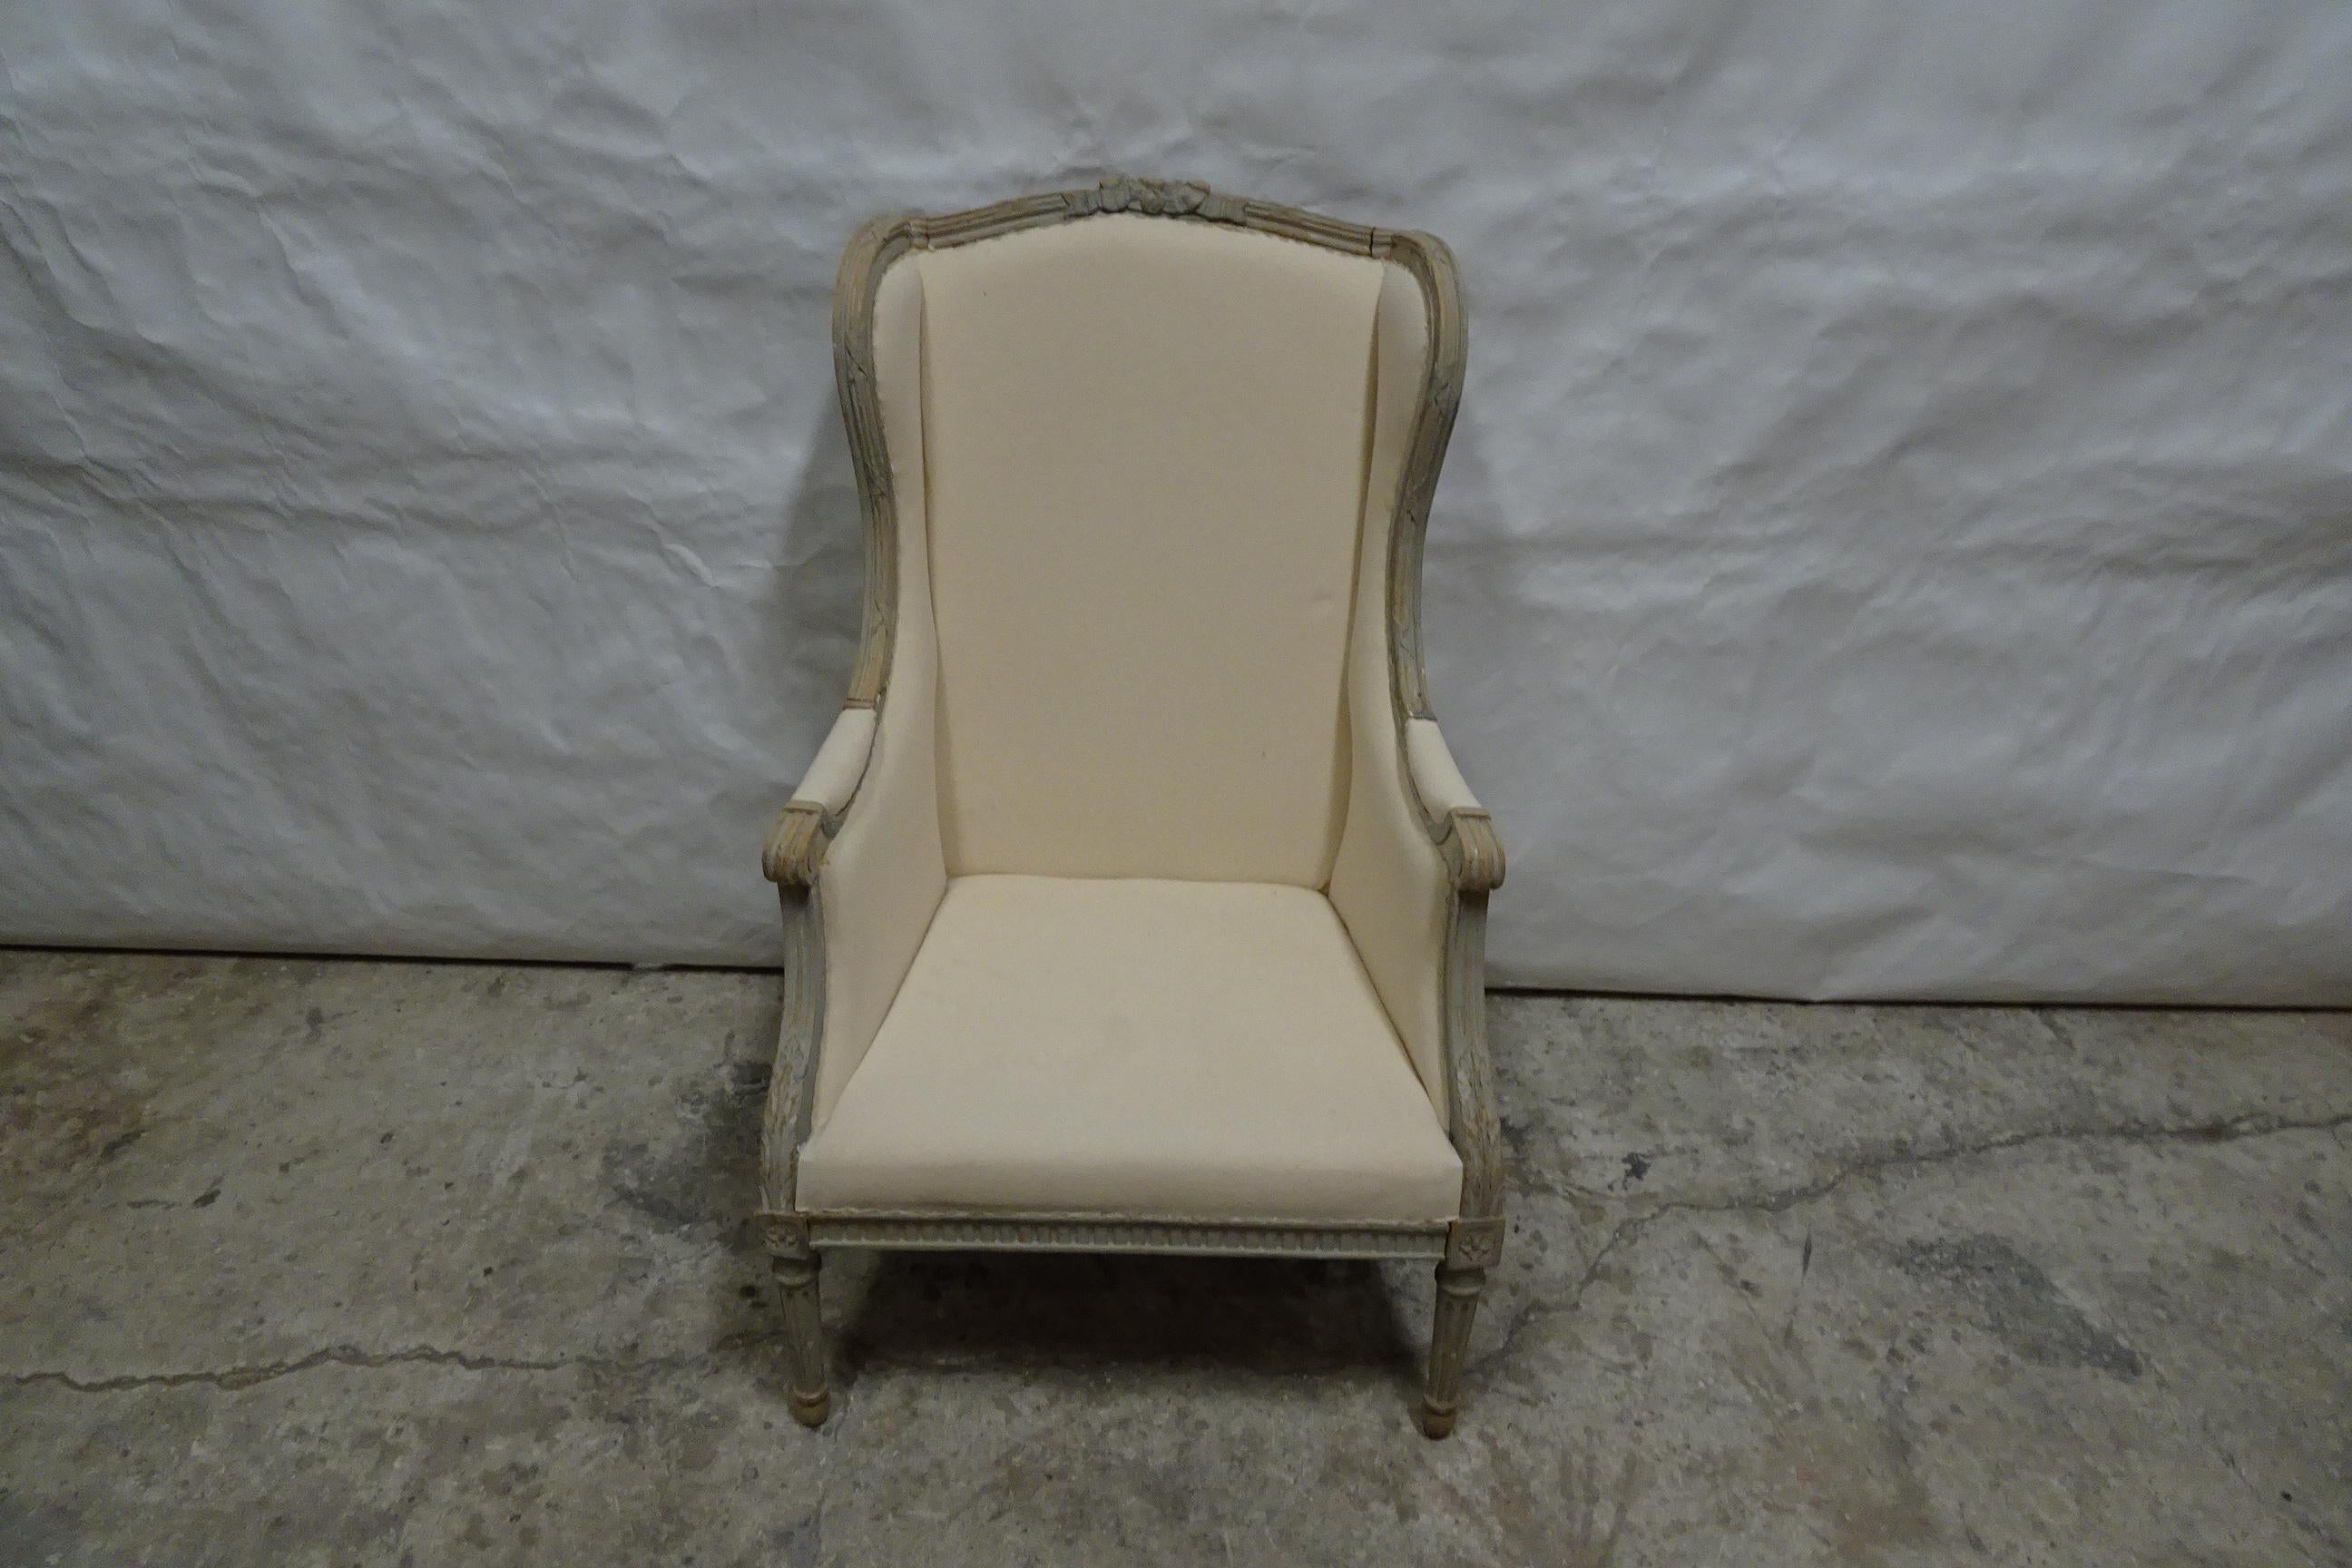 This s a Unique 100% Original Finish Swedish Gustavian Berger Chair.